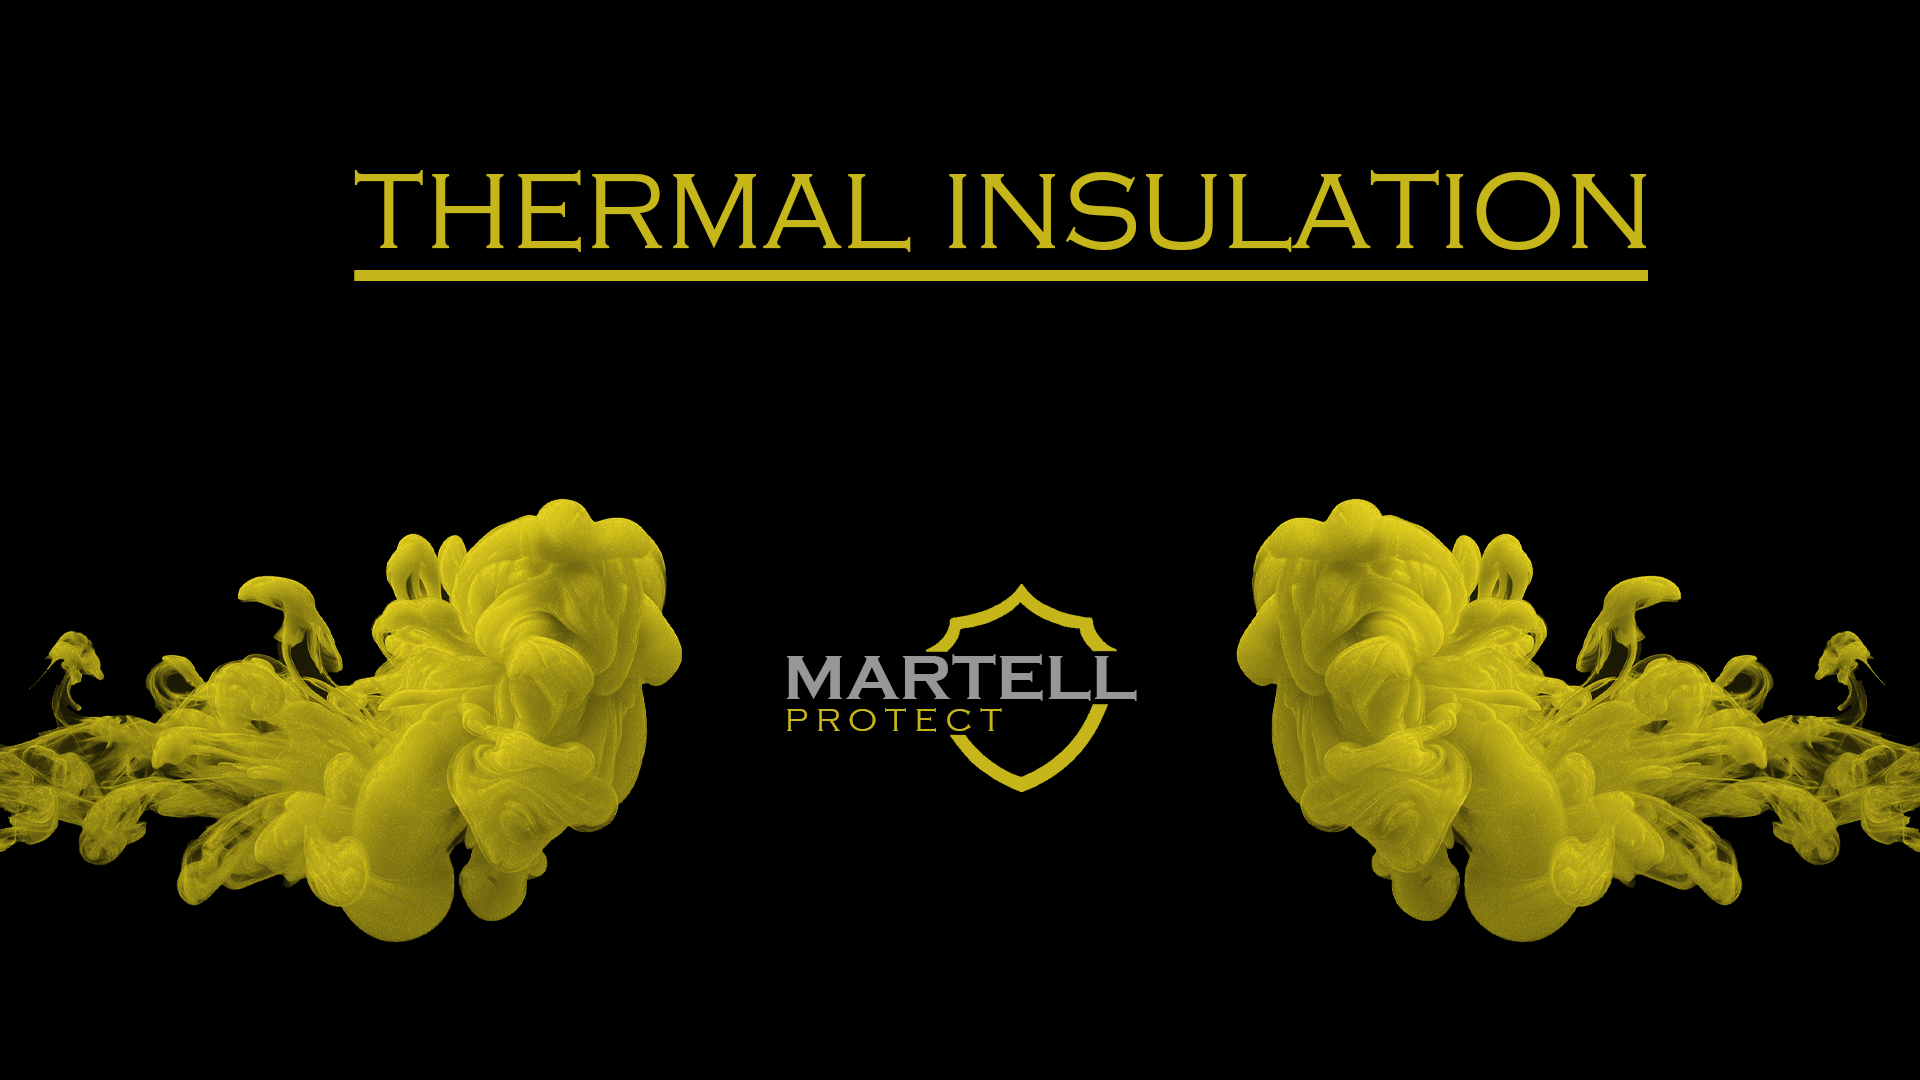 MARTELL PROTECT THERMAL INSULATION – ELASTICS RIBBONS WITH THERMAL INSULATION